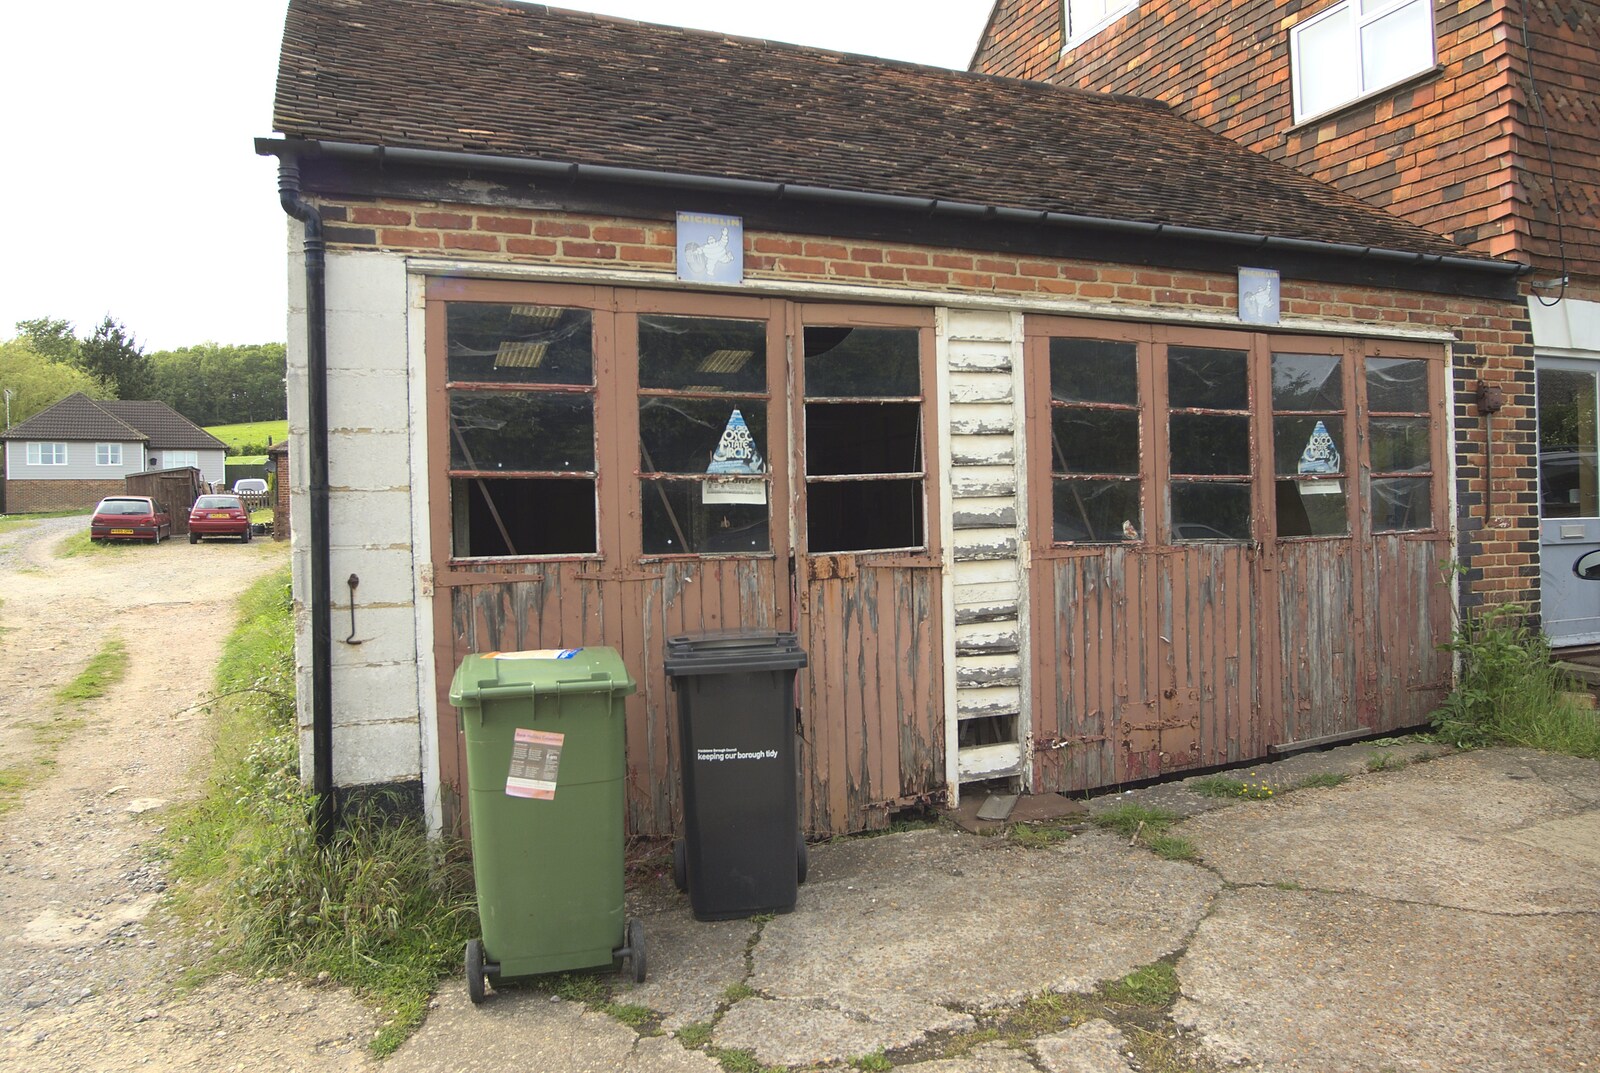 Some semi-derelict garages from The BSCC Weekend Away Ride, Lenham, Kent - 16th May 2009